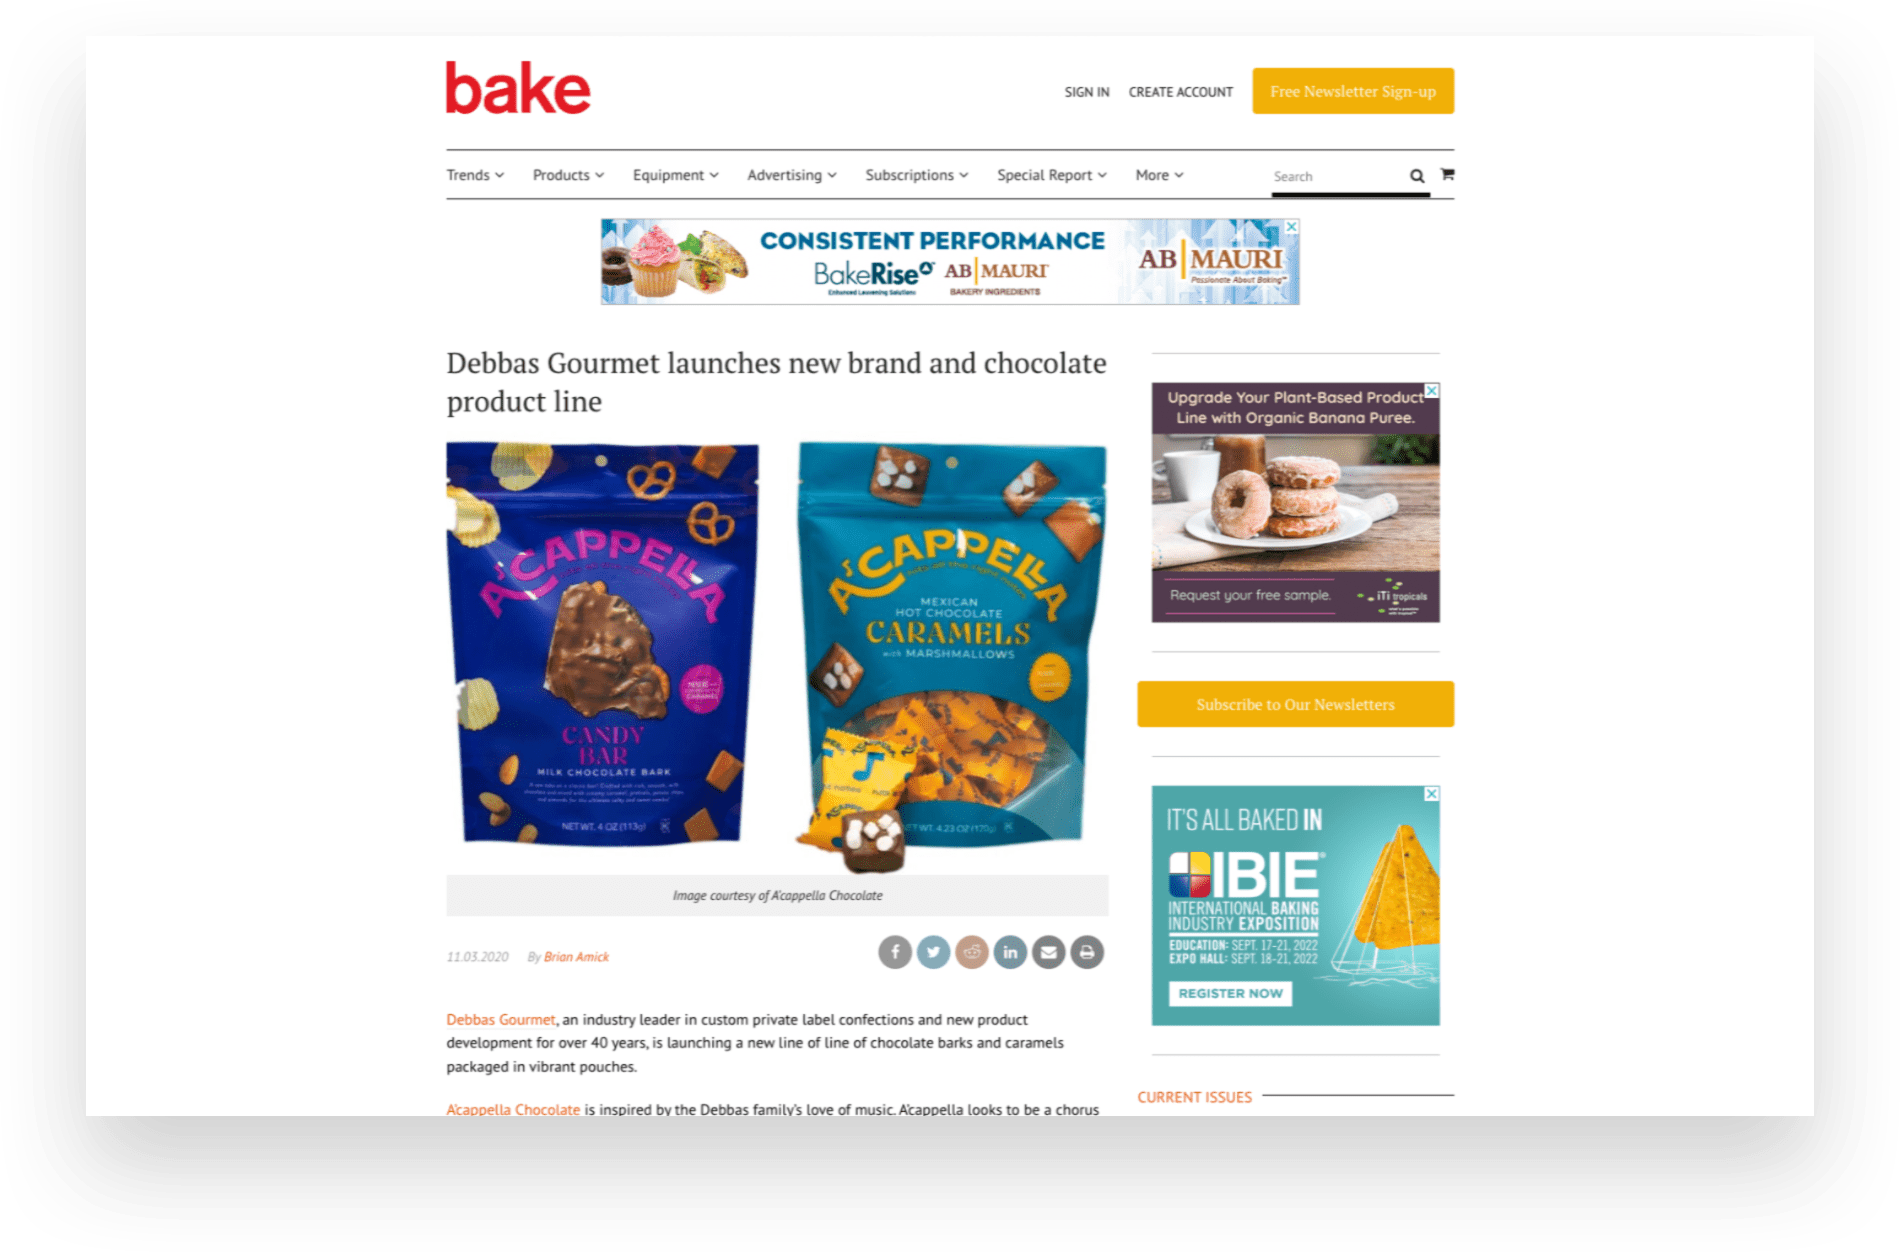 Online story screenshot about A'cappella Chocolate products